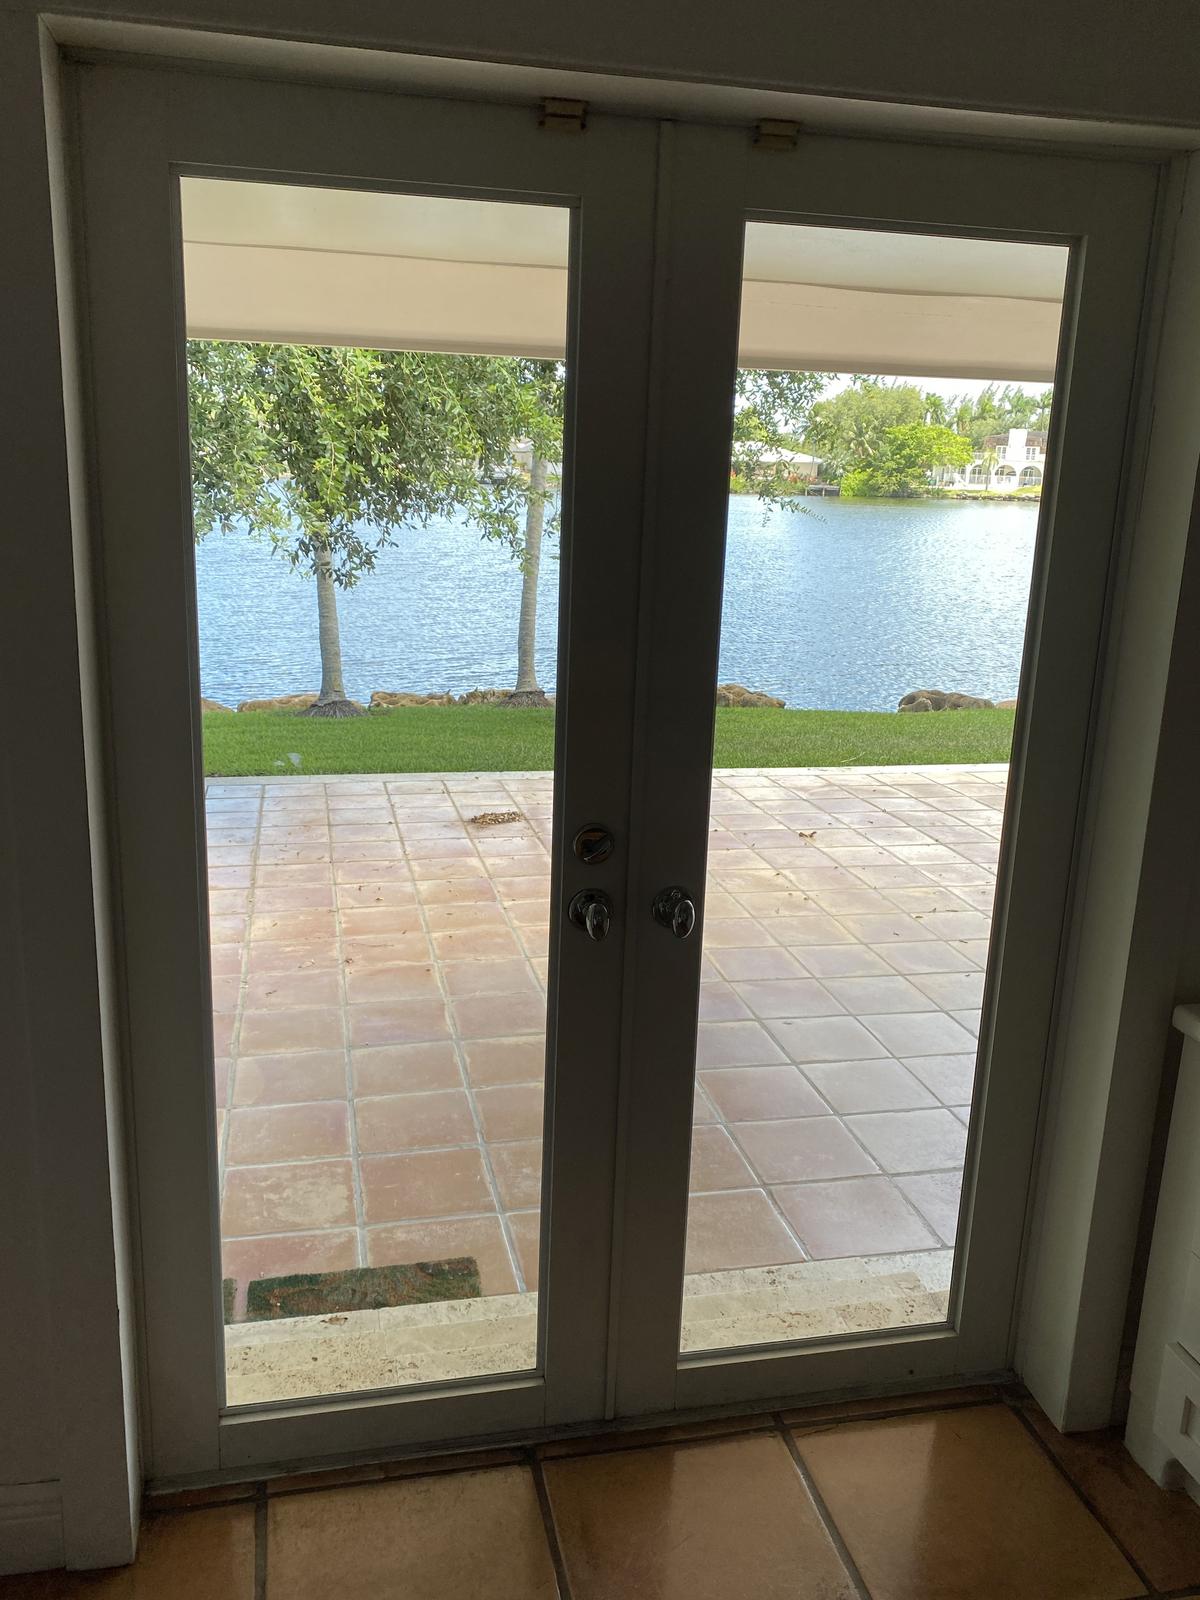 56"W x 77"H Metal Framed French Doors with Stainless Steel Knob Set